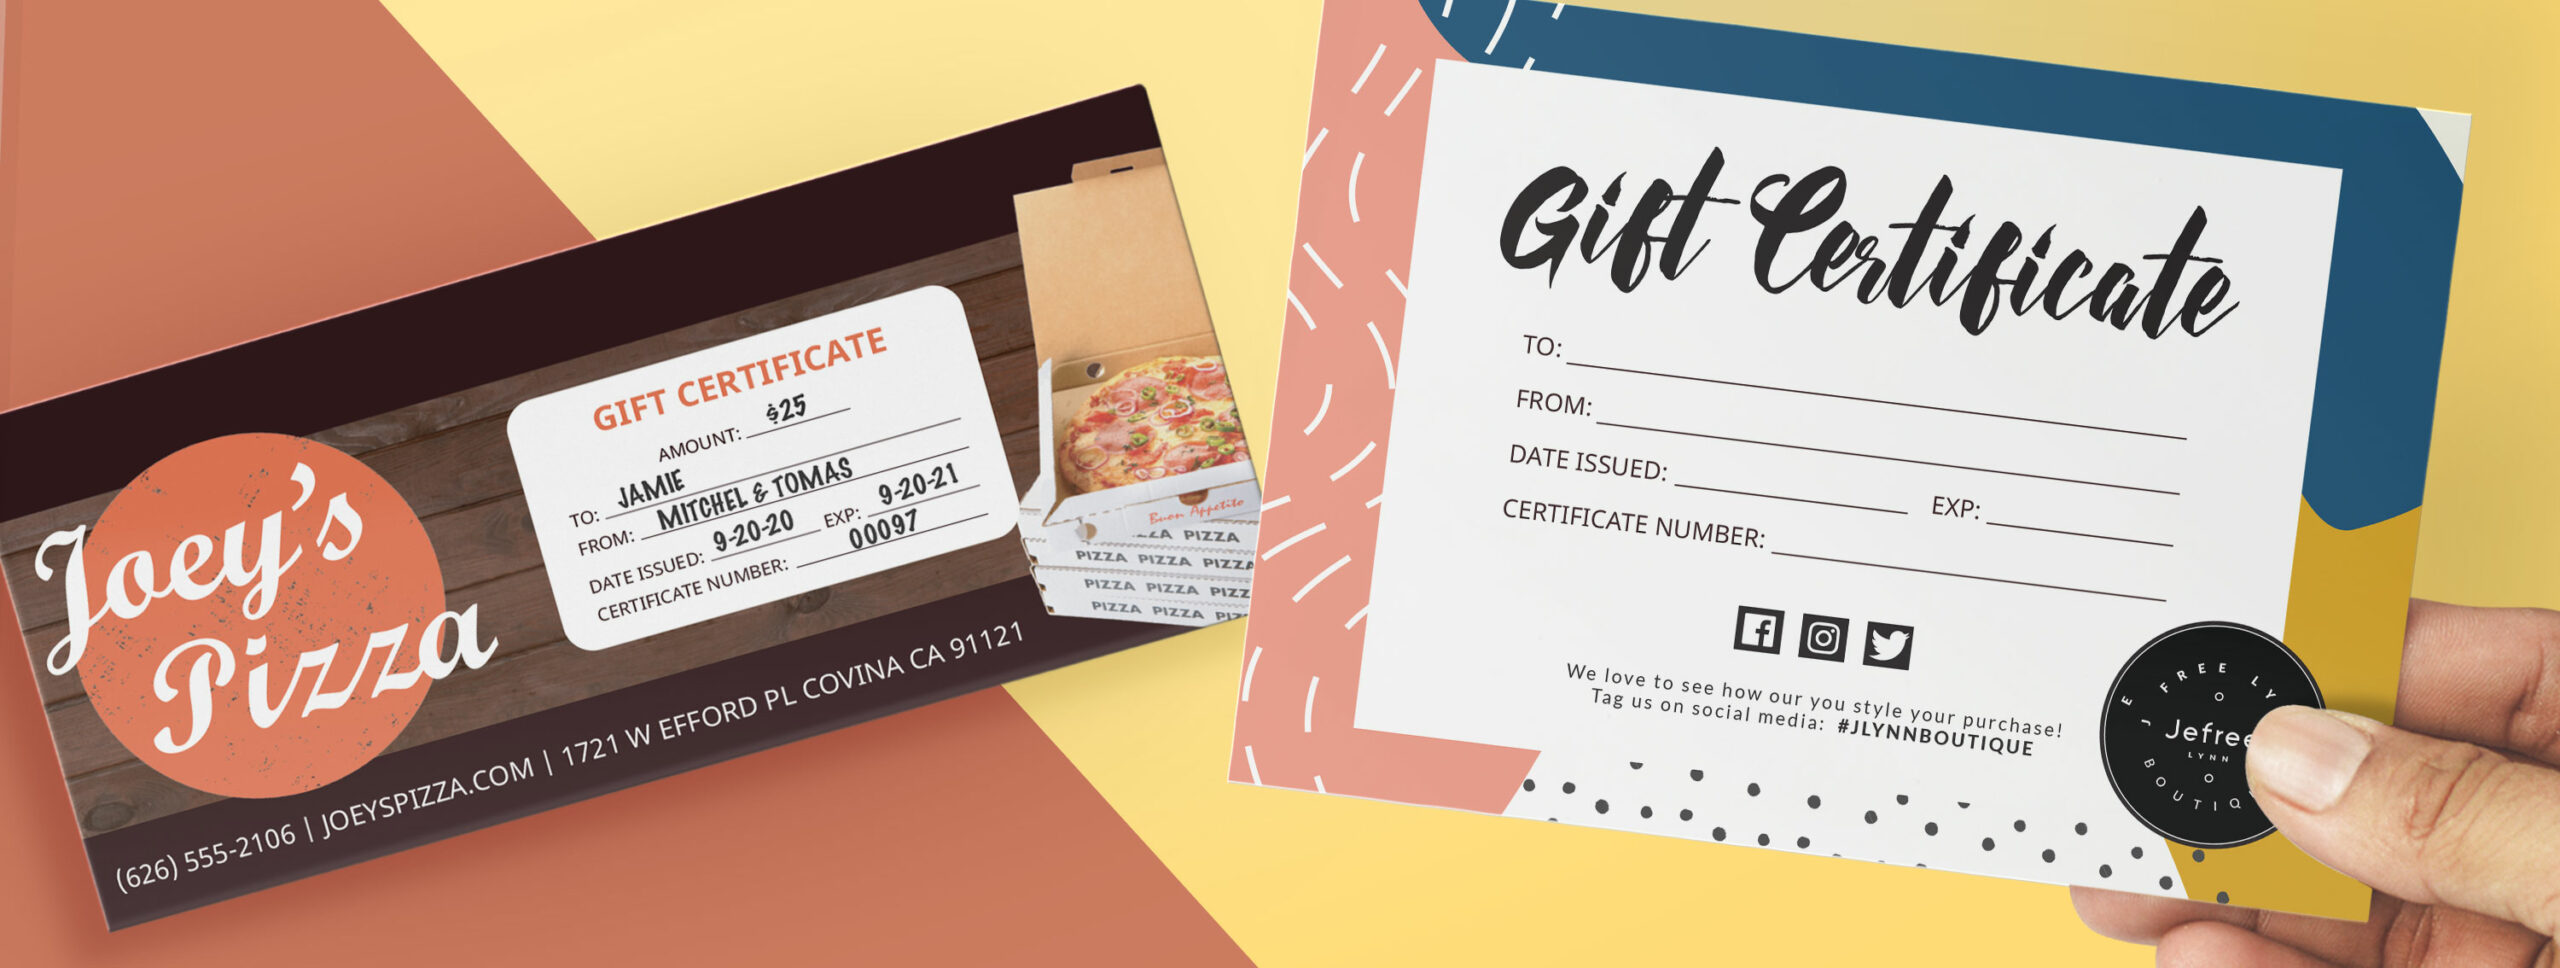 template gift certificate